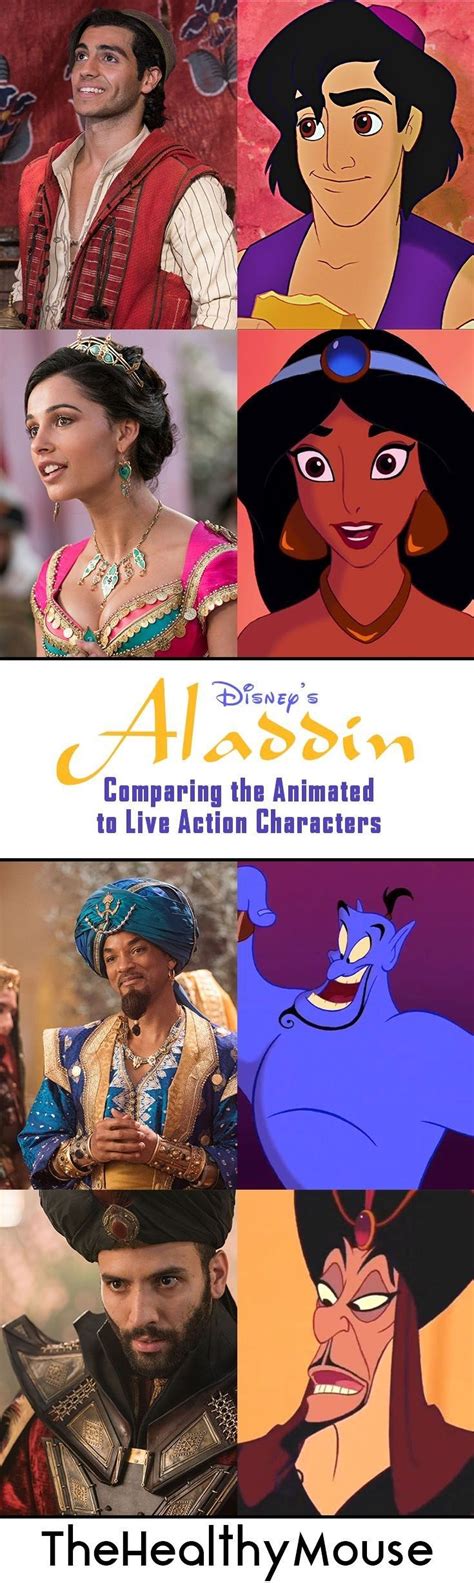 Disneys Aladdin Review Read My Spoiler Free Review And My Comparison Of The Characters For